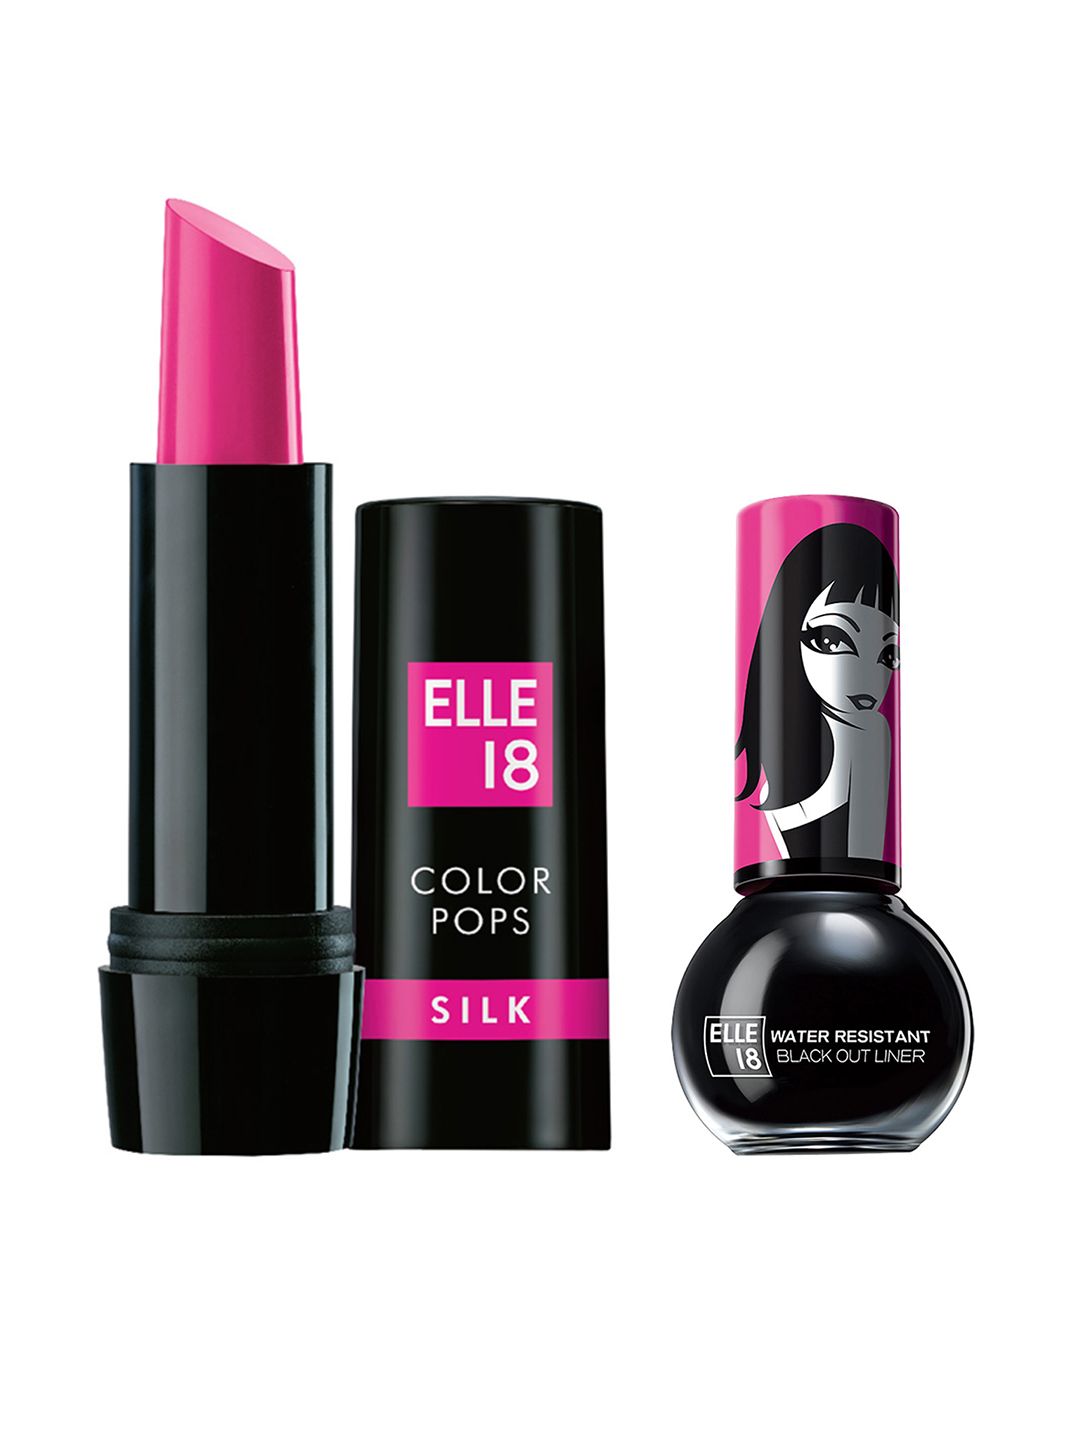 ELLE 18 Color Pop Lip Color & Water Resistant Eyeliner Combo Price in India